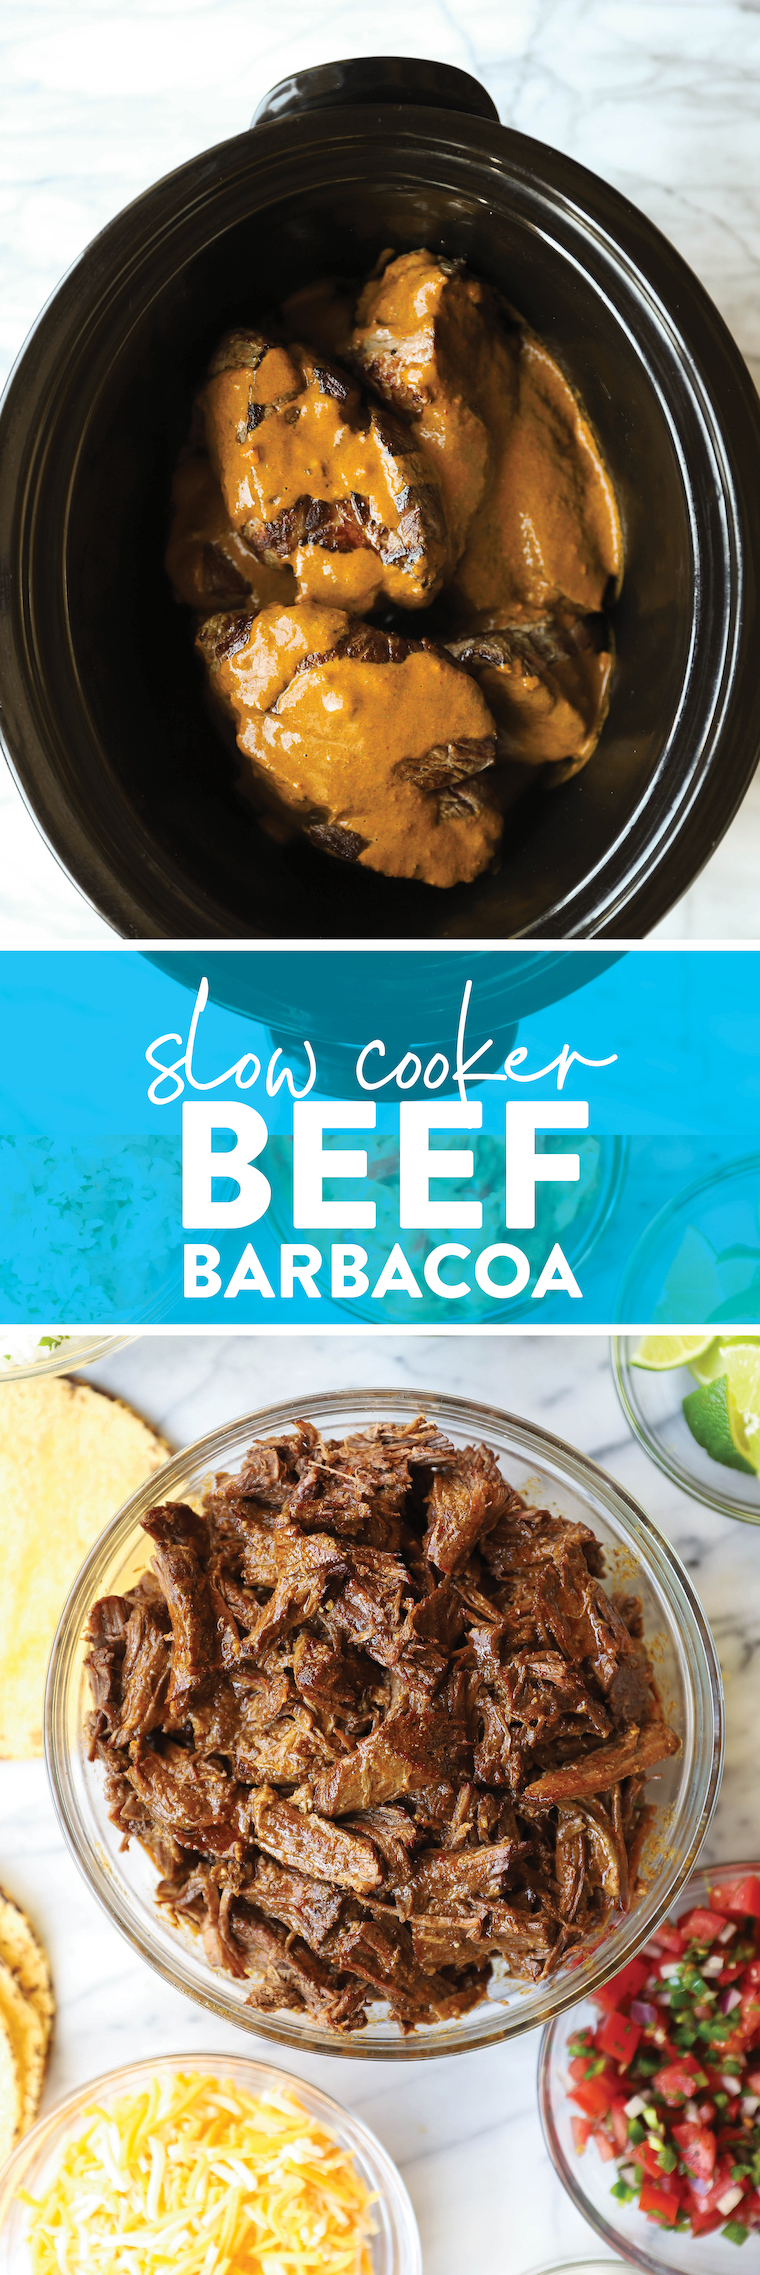 Slow Cooker Beef Barbacoa - So easy and so flavorful! Cooked low + slow in the crockpot. Perfect for tacos, burritos, quesadillas, and more!